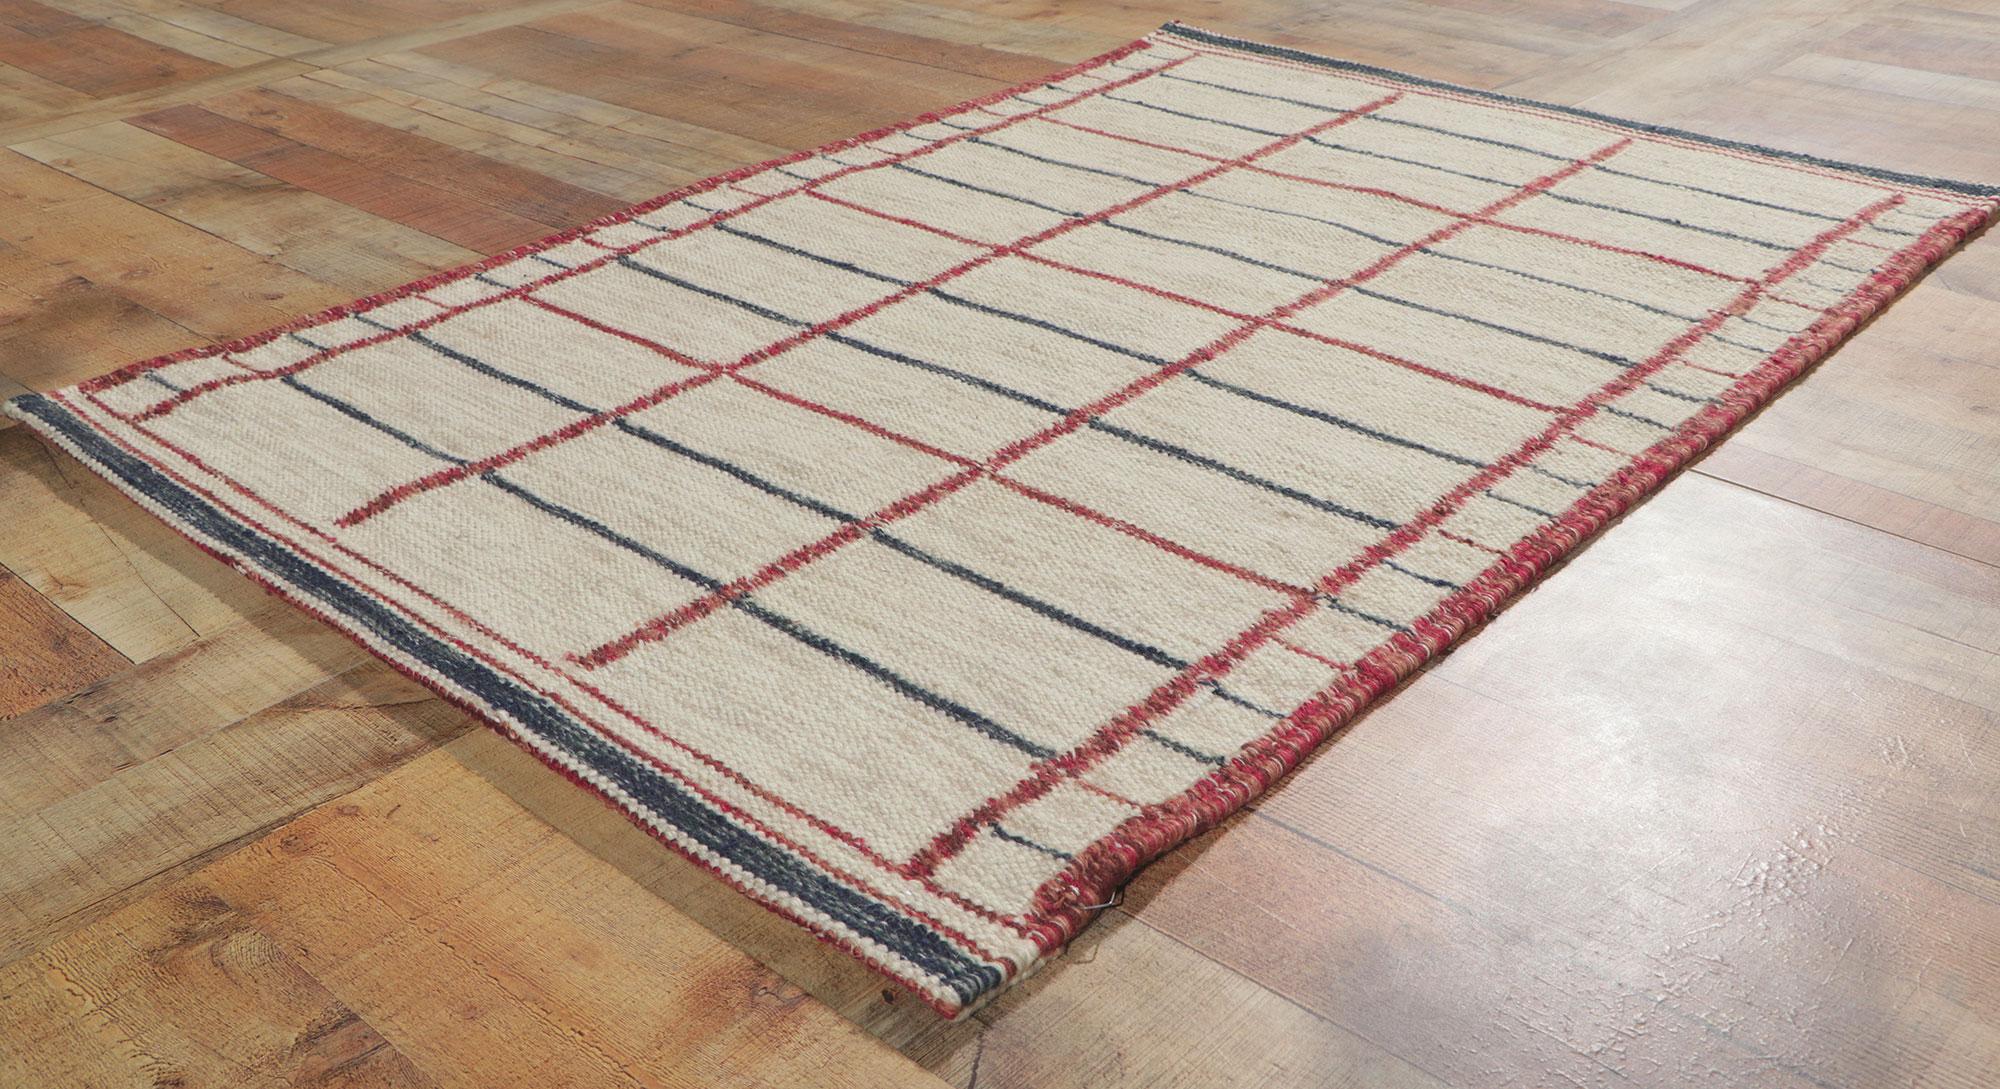 Pair of Matching Swedish Inspired Kilim Rugs with Scandinavian Modern Style For Sale 3